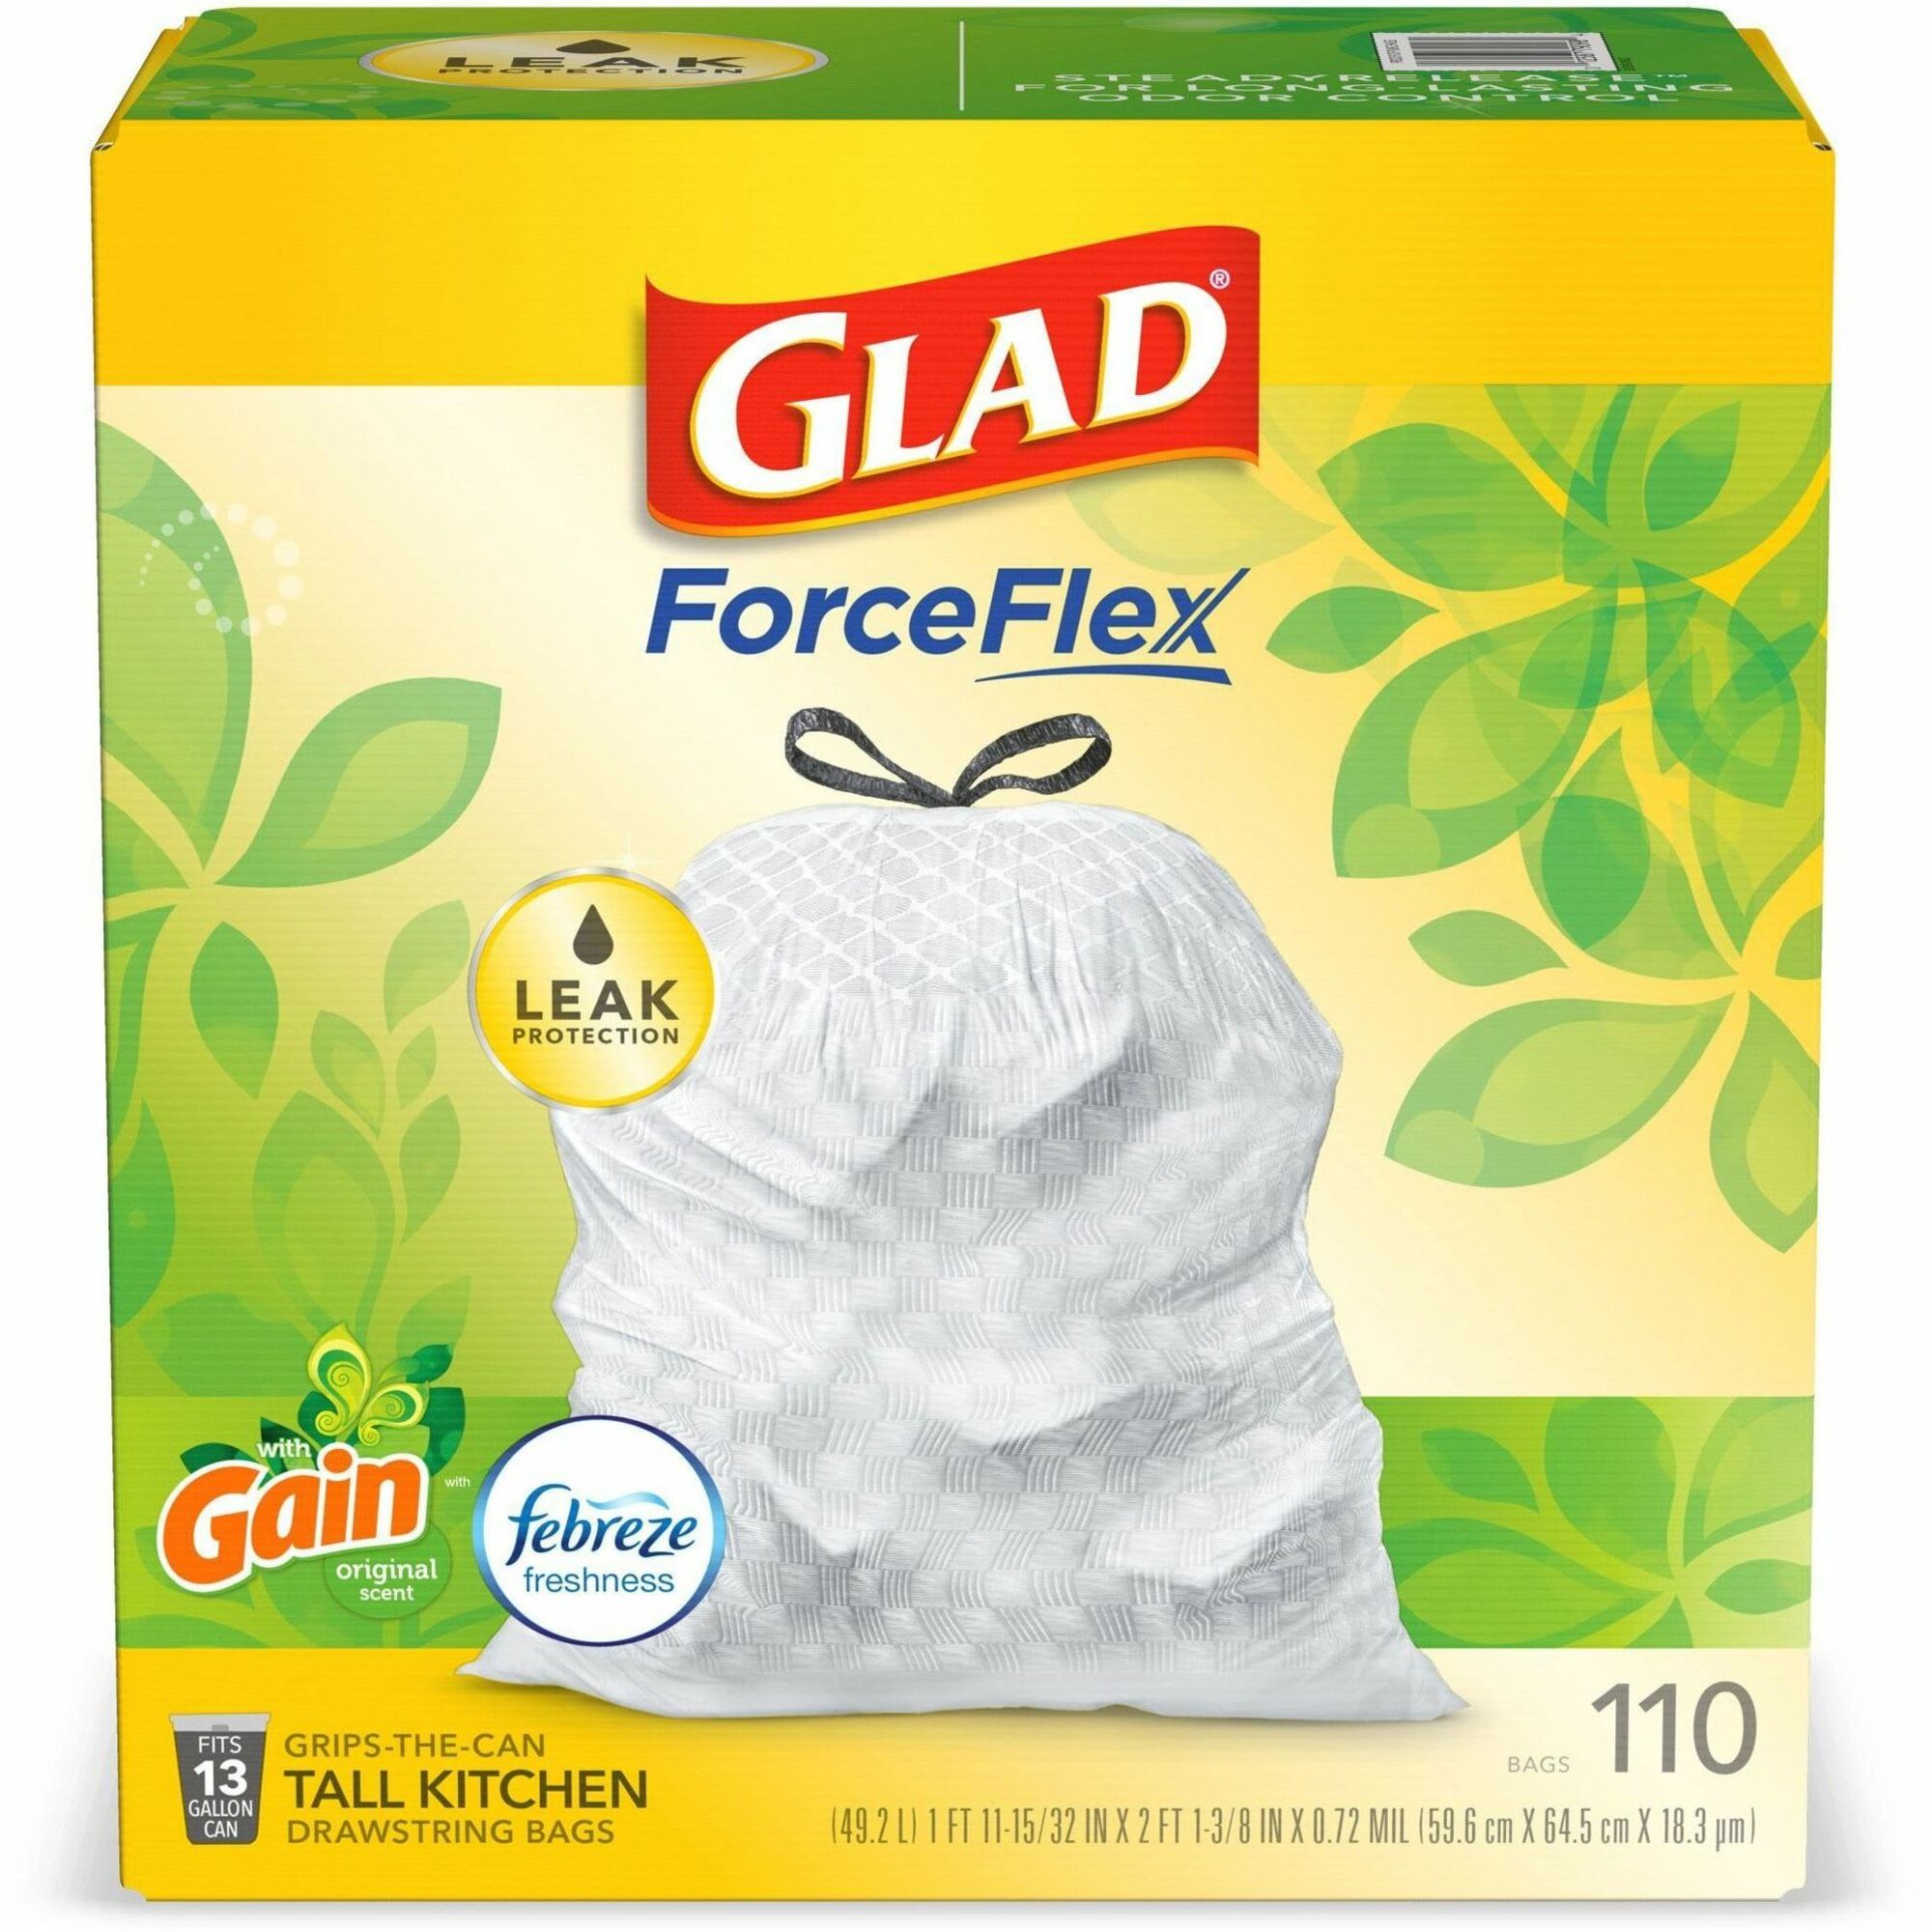 Glad ForceFlex Tall Kitchen Drawstring Trash Bags - Gain Original with Febreze Freshness - 13 gal Capacity - 25.38 ft Width x 33.75 ft Length - 0.72 mil (18 Micron) Thickness - Drawstring Closure - White - 110/Box - Home, Office, Kitchen, Breakroom - 1